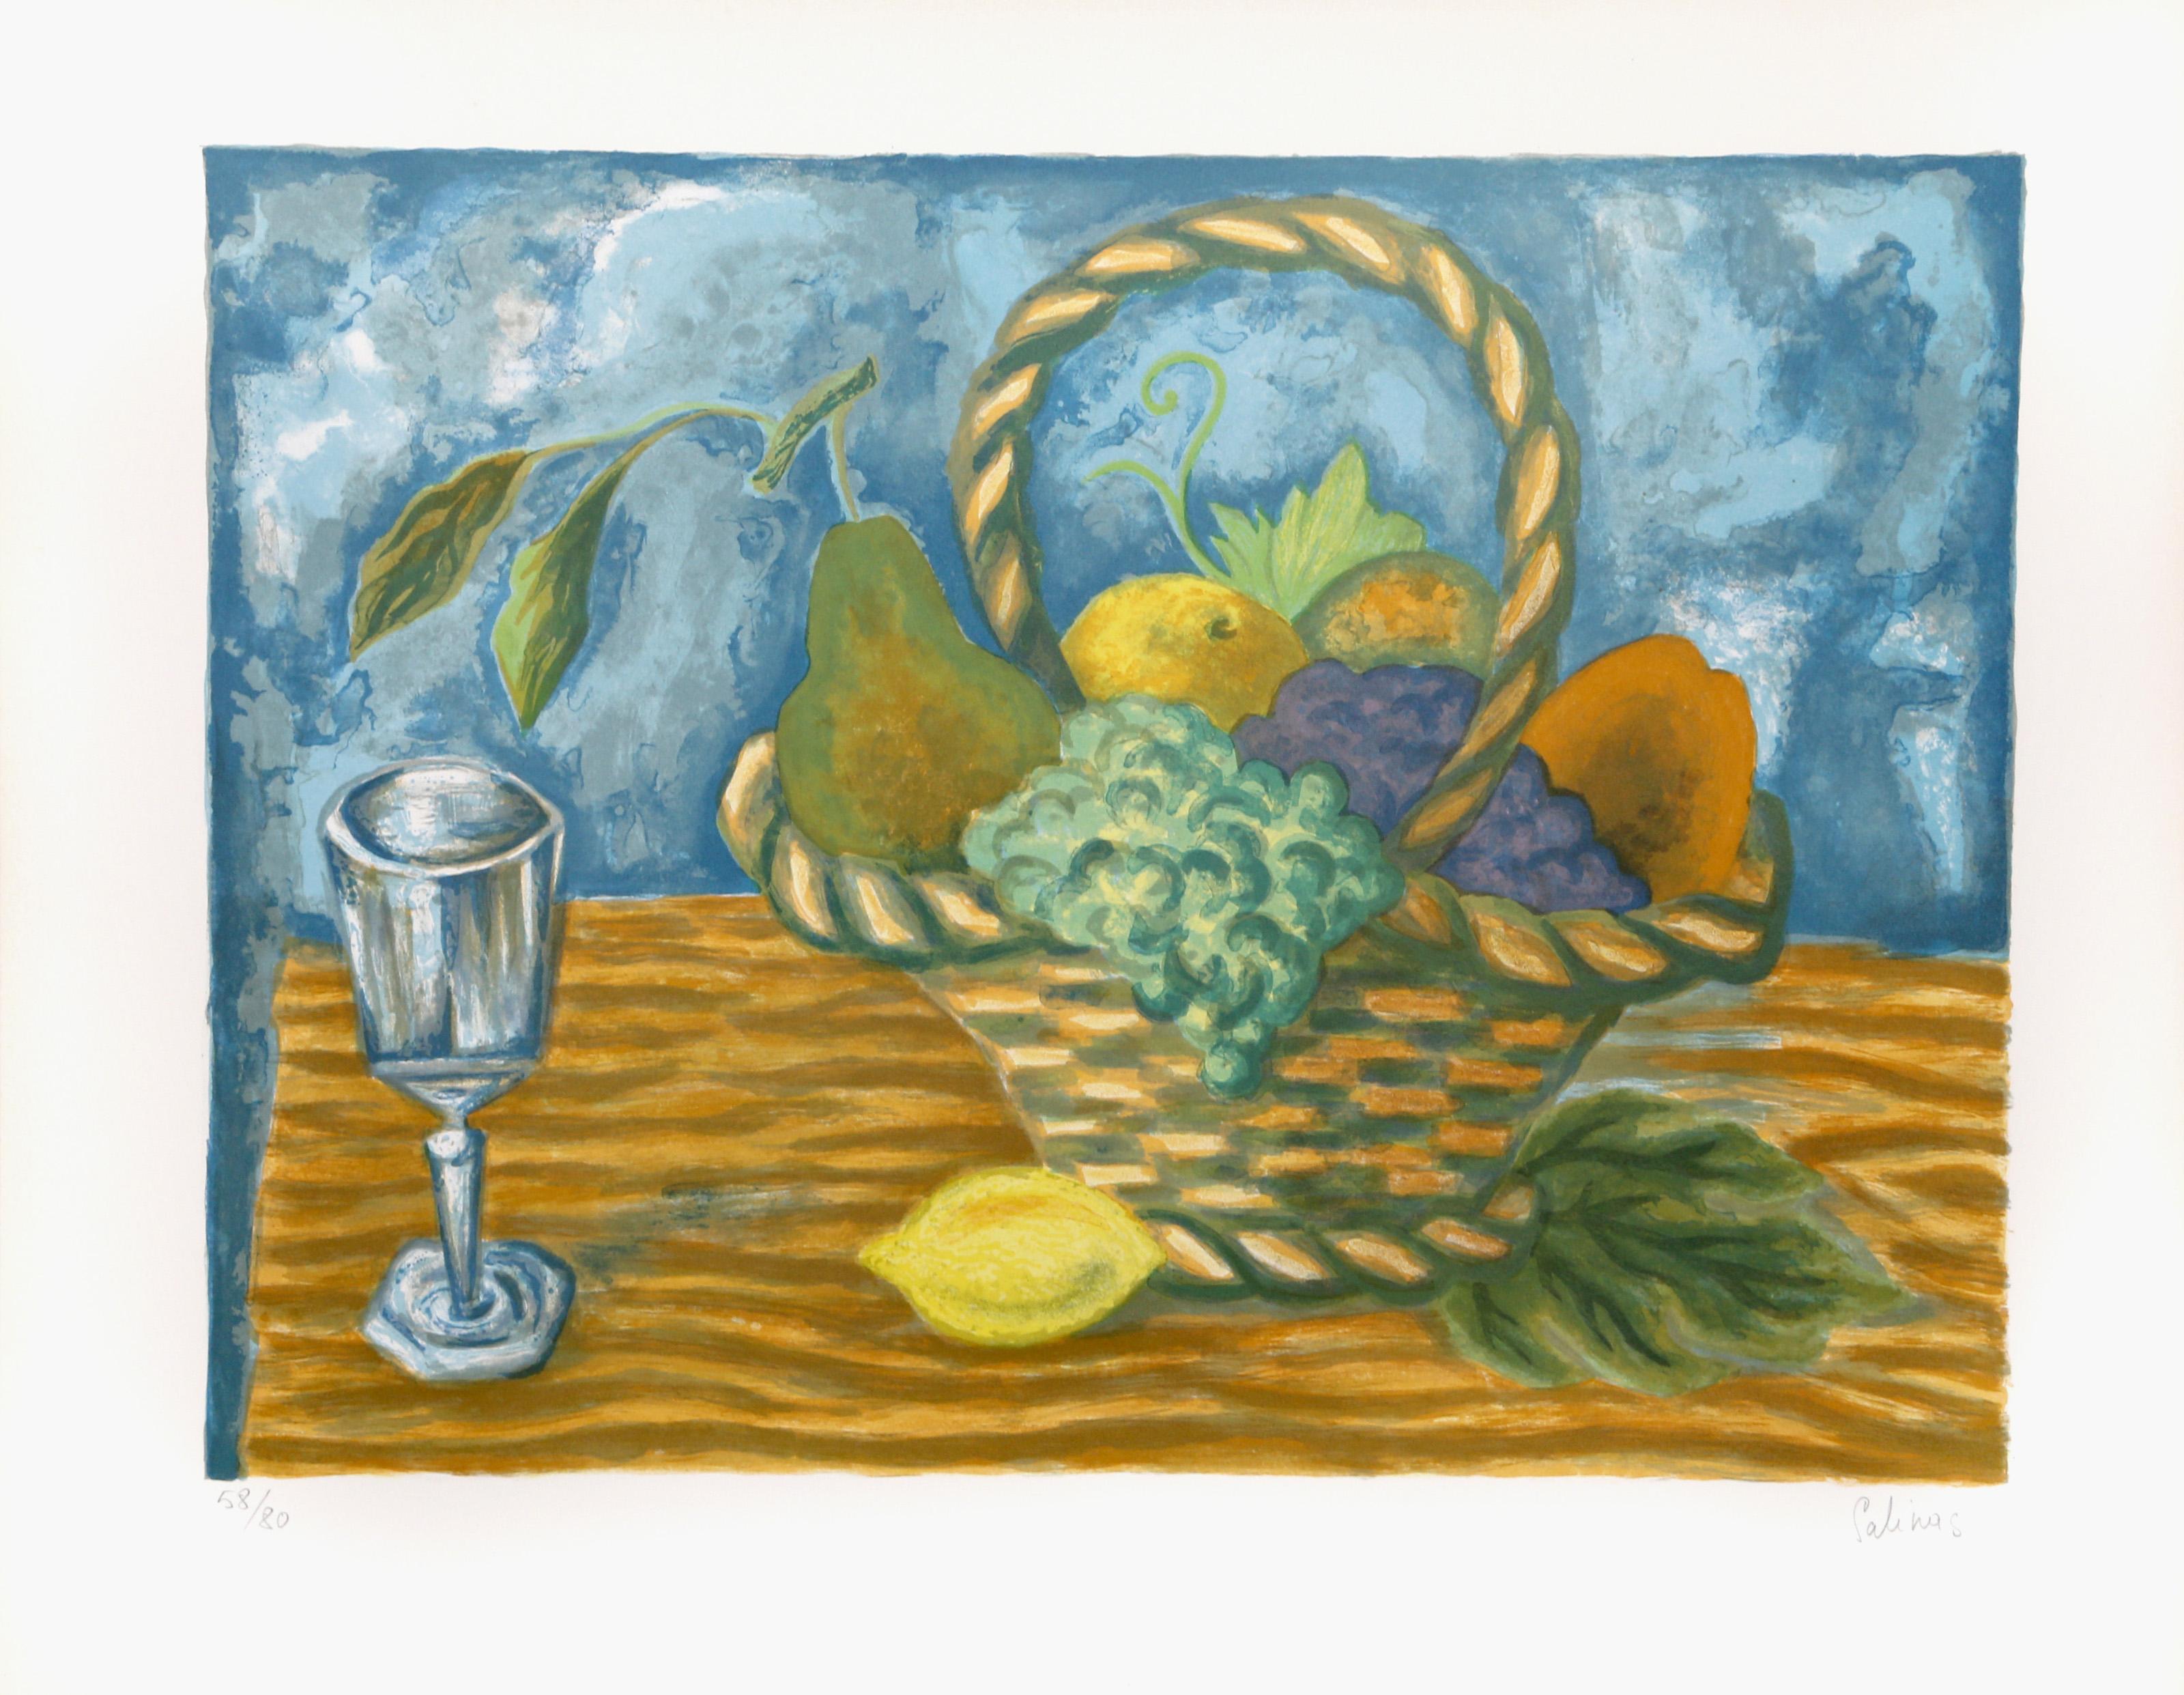 Laurent Marcel Salinas, Egyptian/French (1913 - 2010) -  Nature Morte. Year: circa 1980, Medium: Lithograph, signed and numbered in pencil, Edition: 80, Image Size: 14.25 x 19 inches, Size: 19  x 23.5 in. (48.26  x 59.69 cm) 